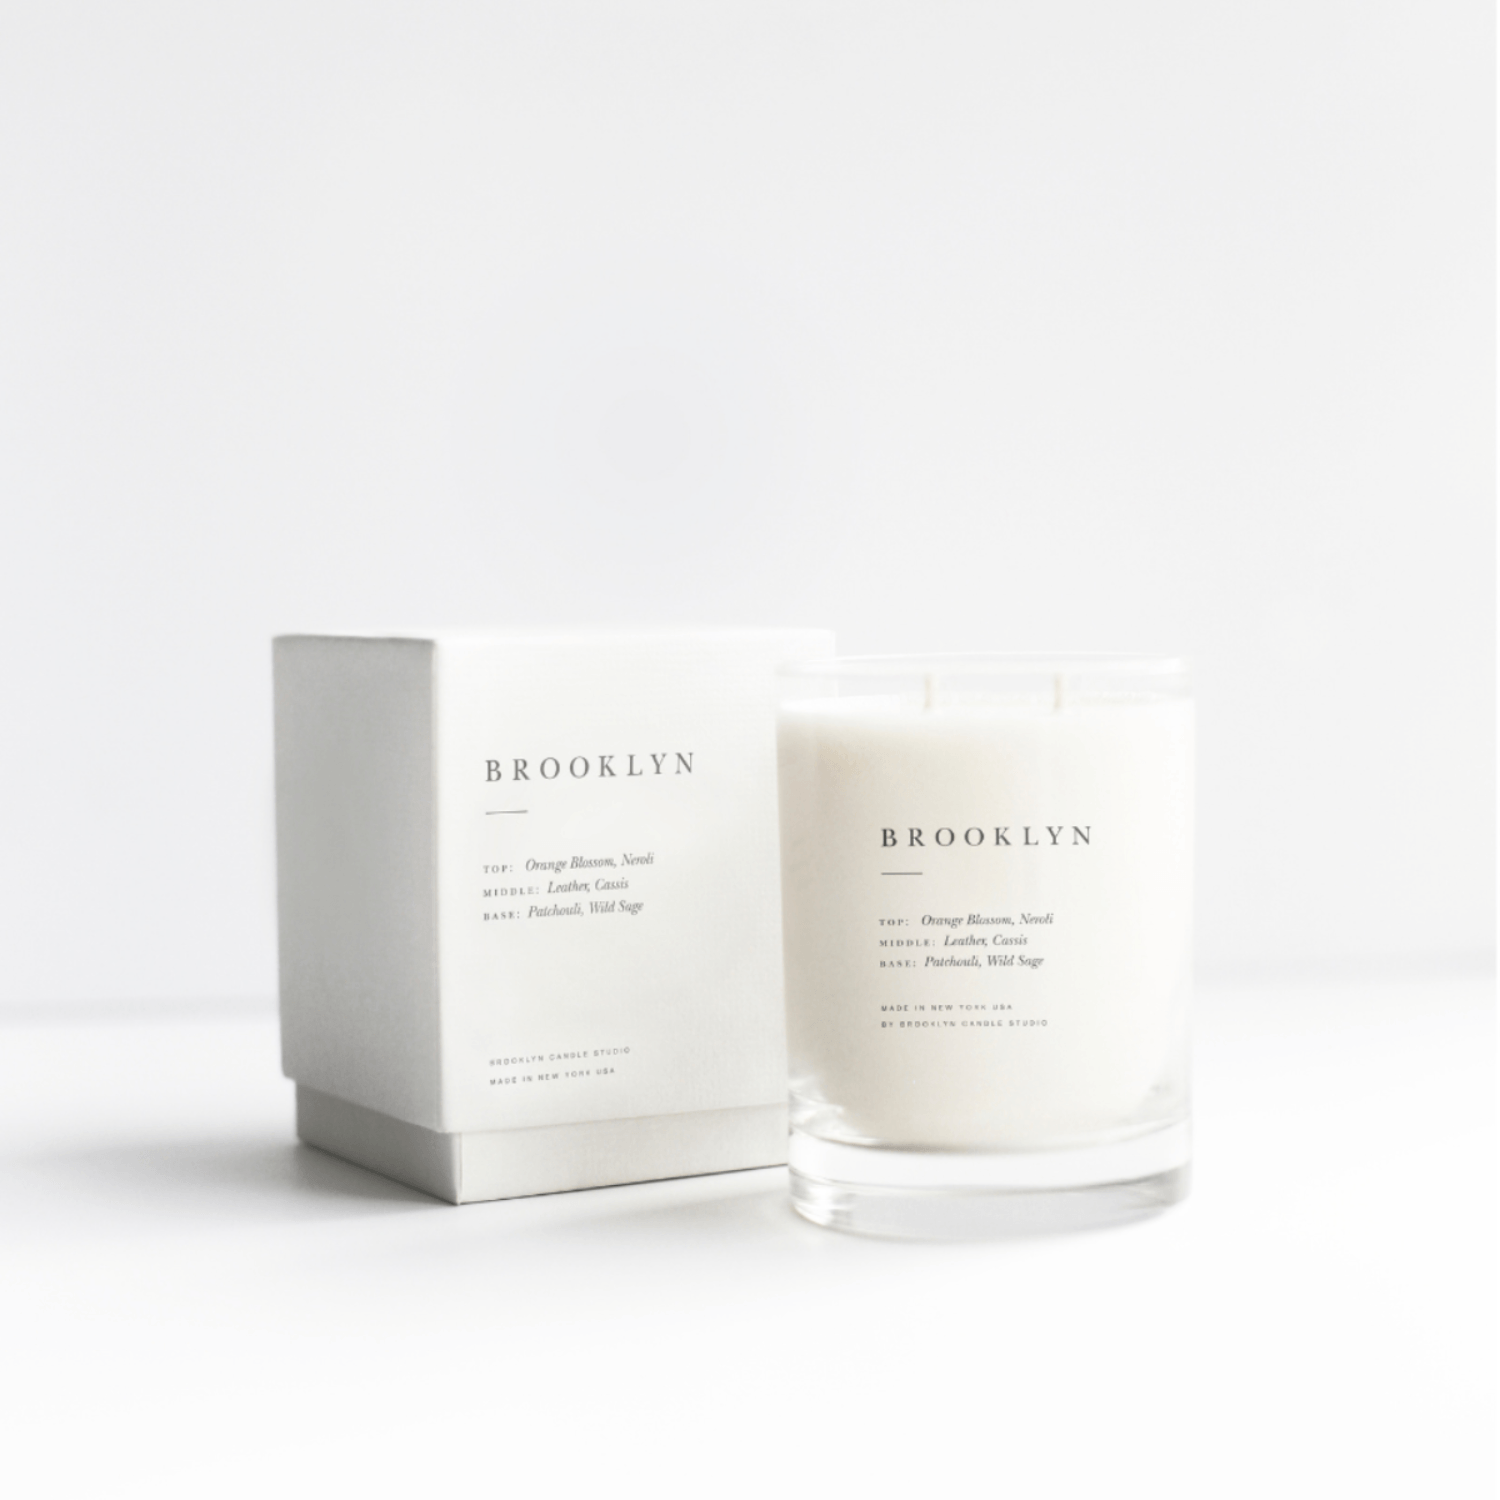 Brooklyn Candle Studio Candle "Brooklyn". Hand poured with 100% soy wax.